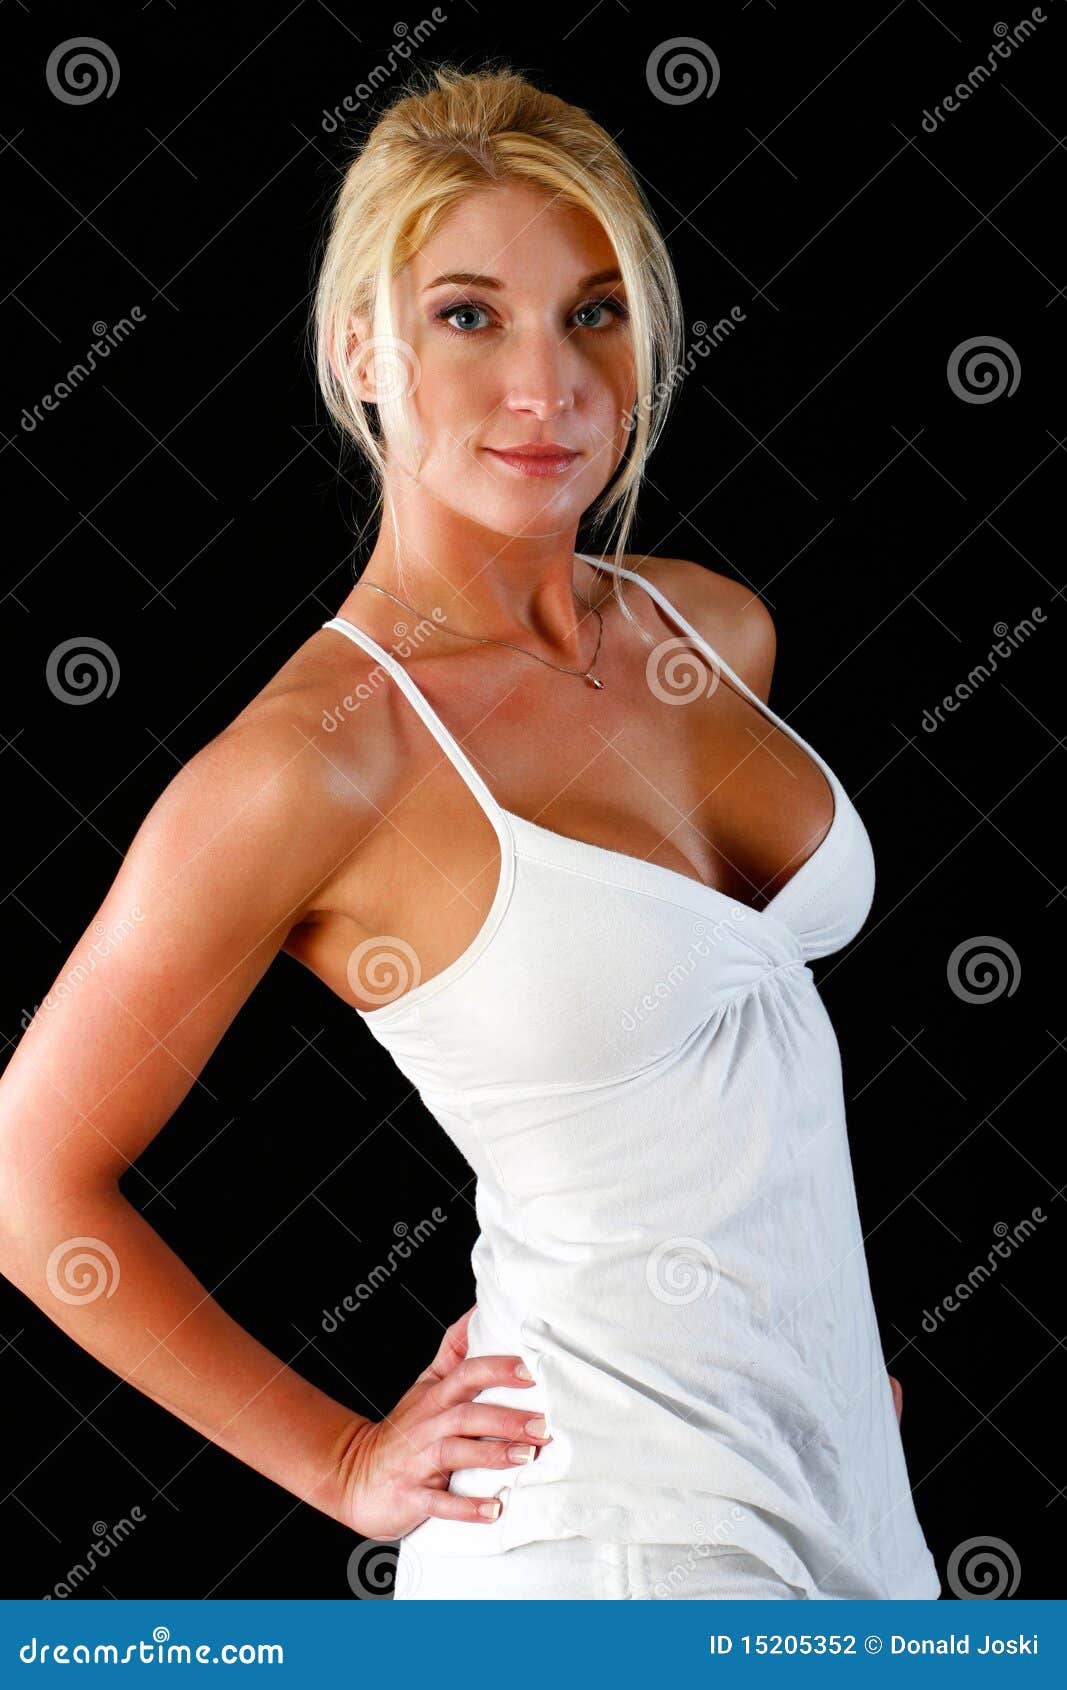 189 Tank Top Big Breast Images, Stock Photos, 3D objects